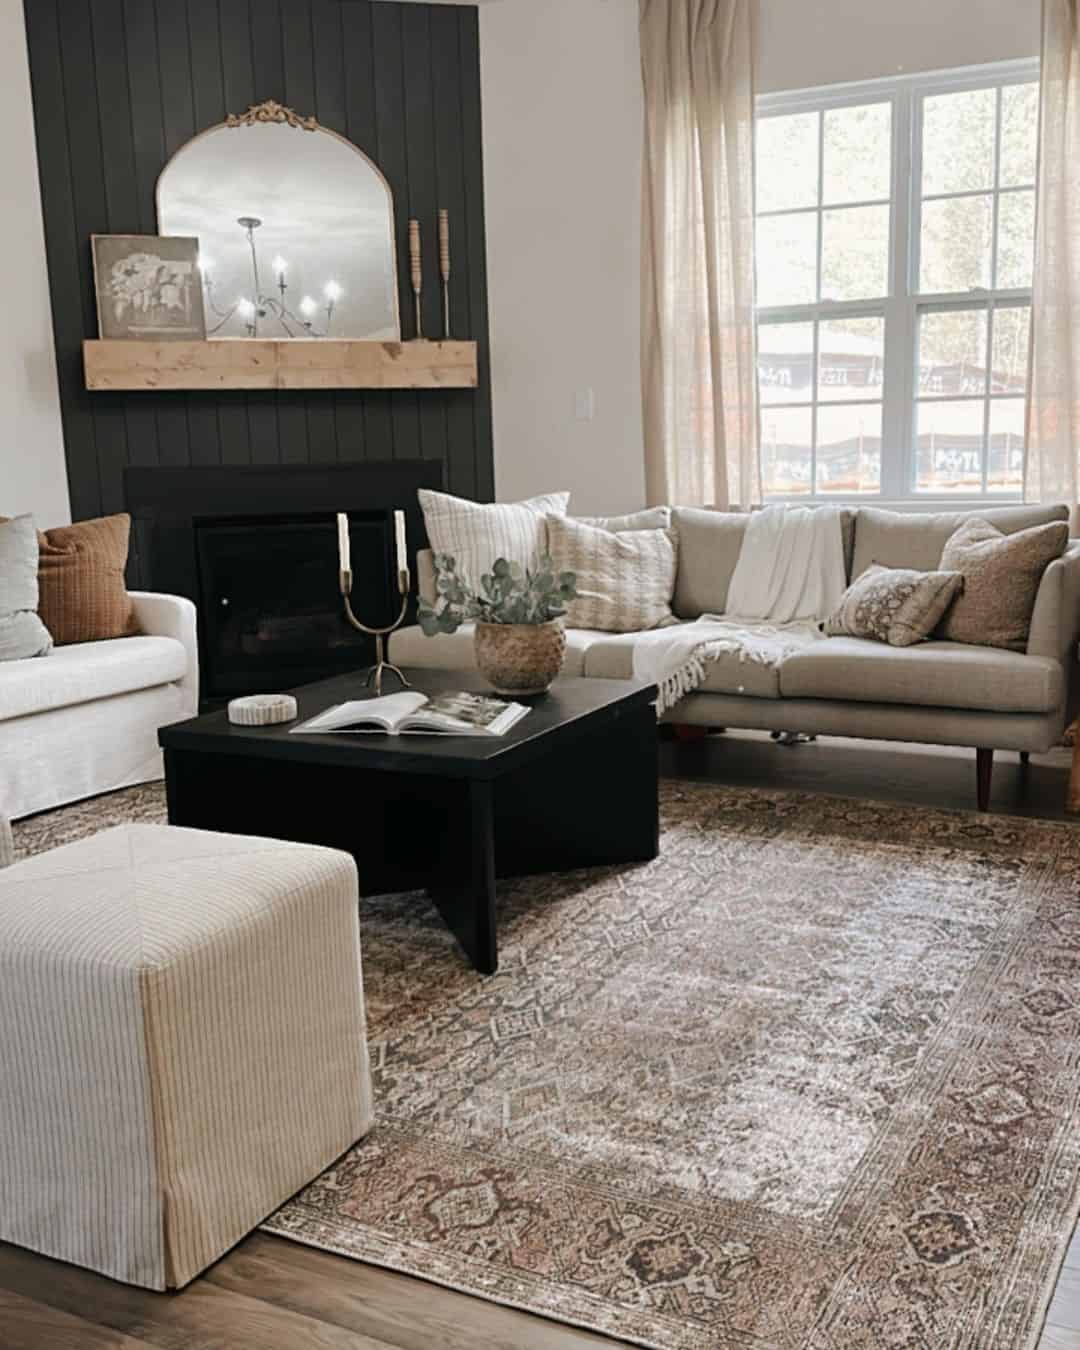 Embracing Neutrality in Your Living Room with a Black Fireplace